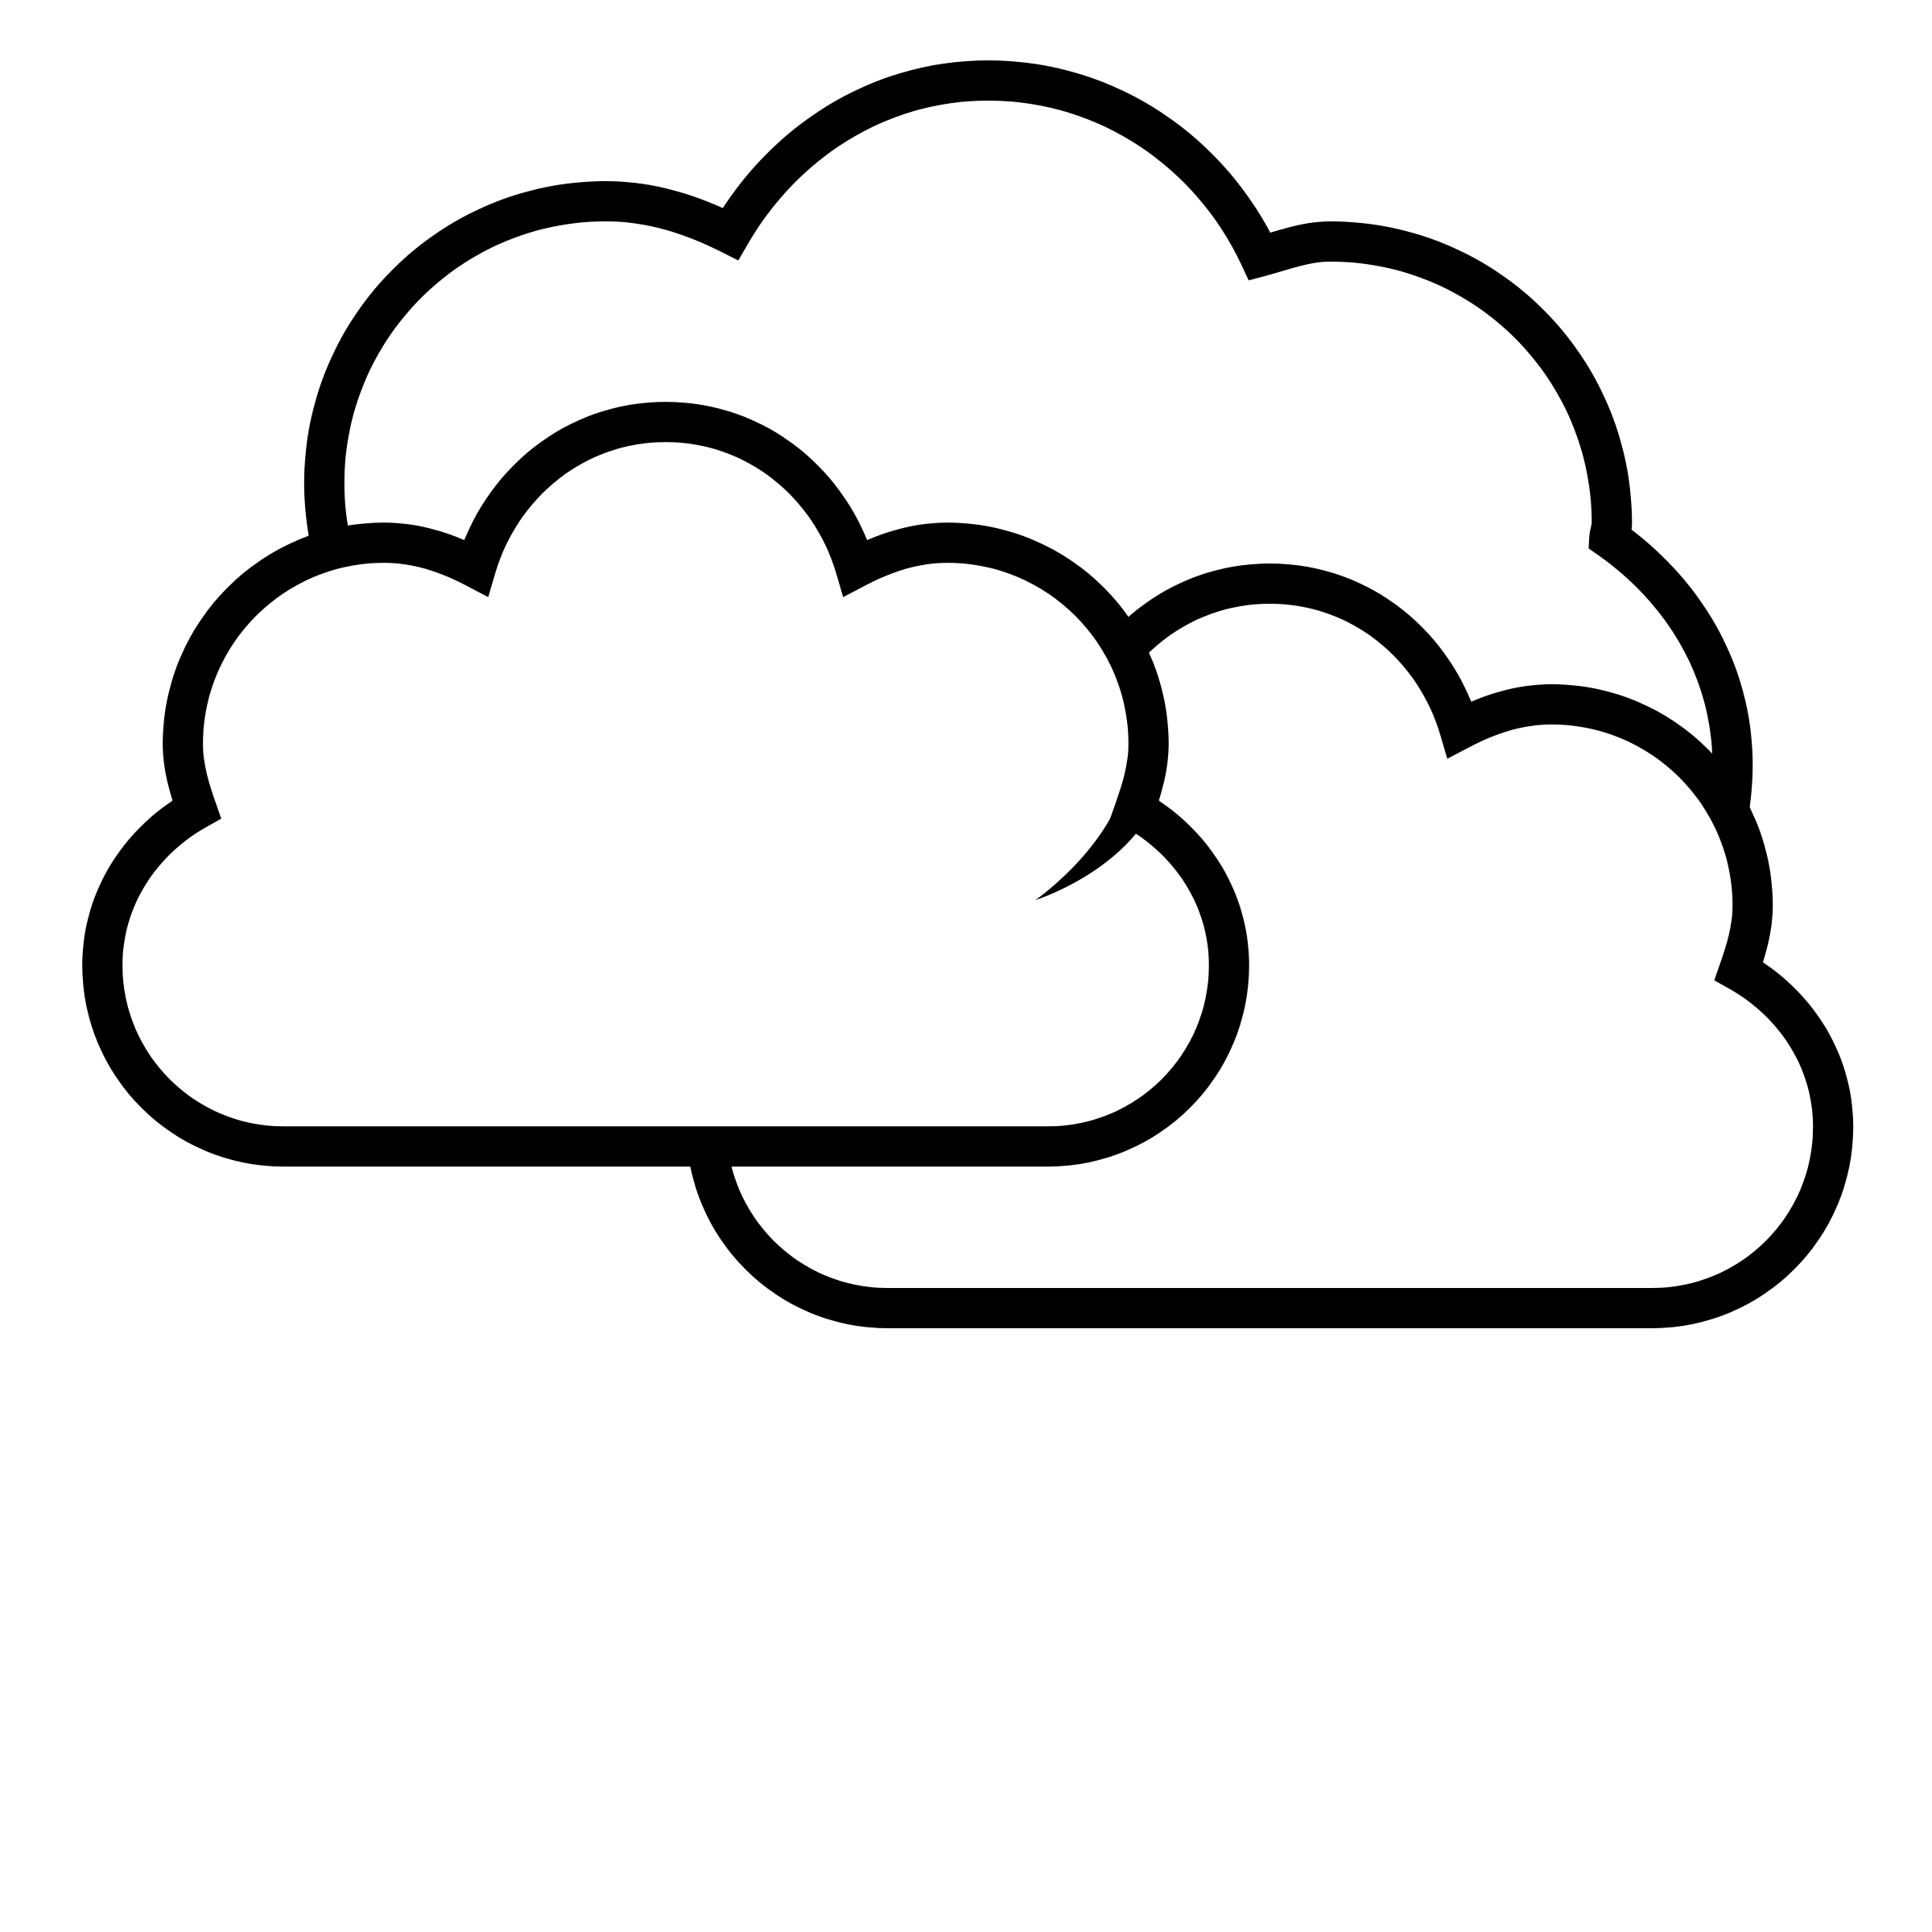 Free Cloud Drawing Png, Download Free Cloud Drawing Png png images